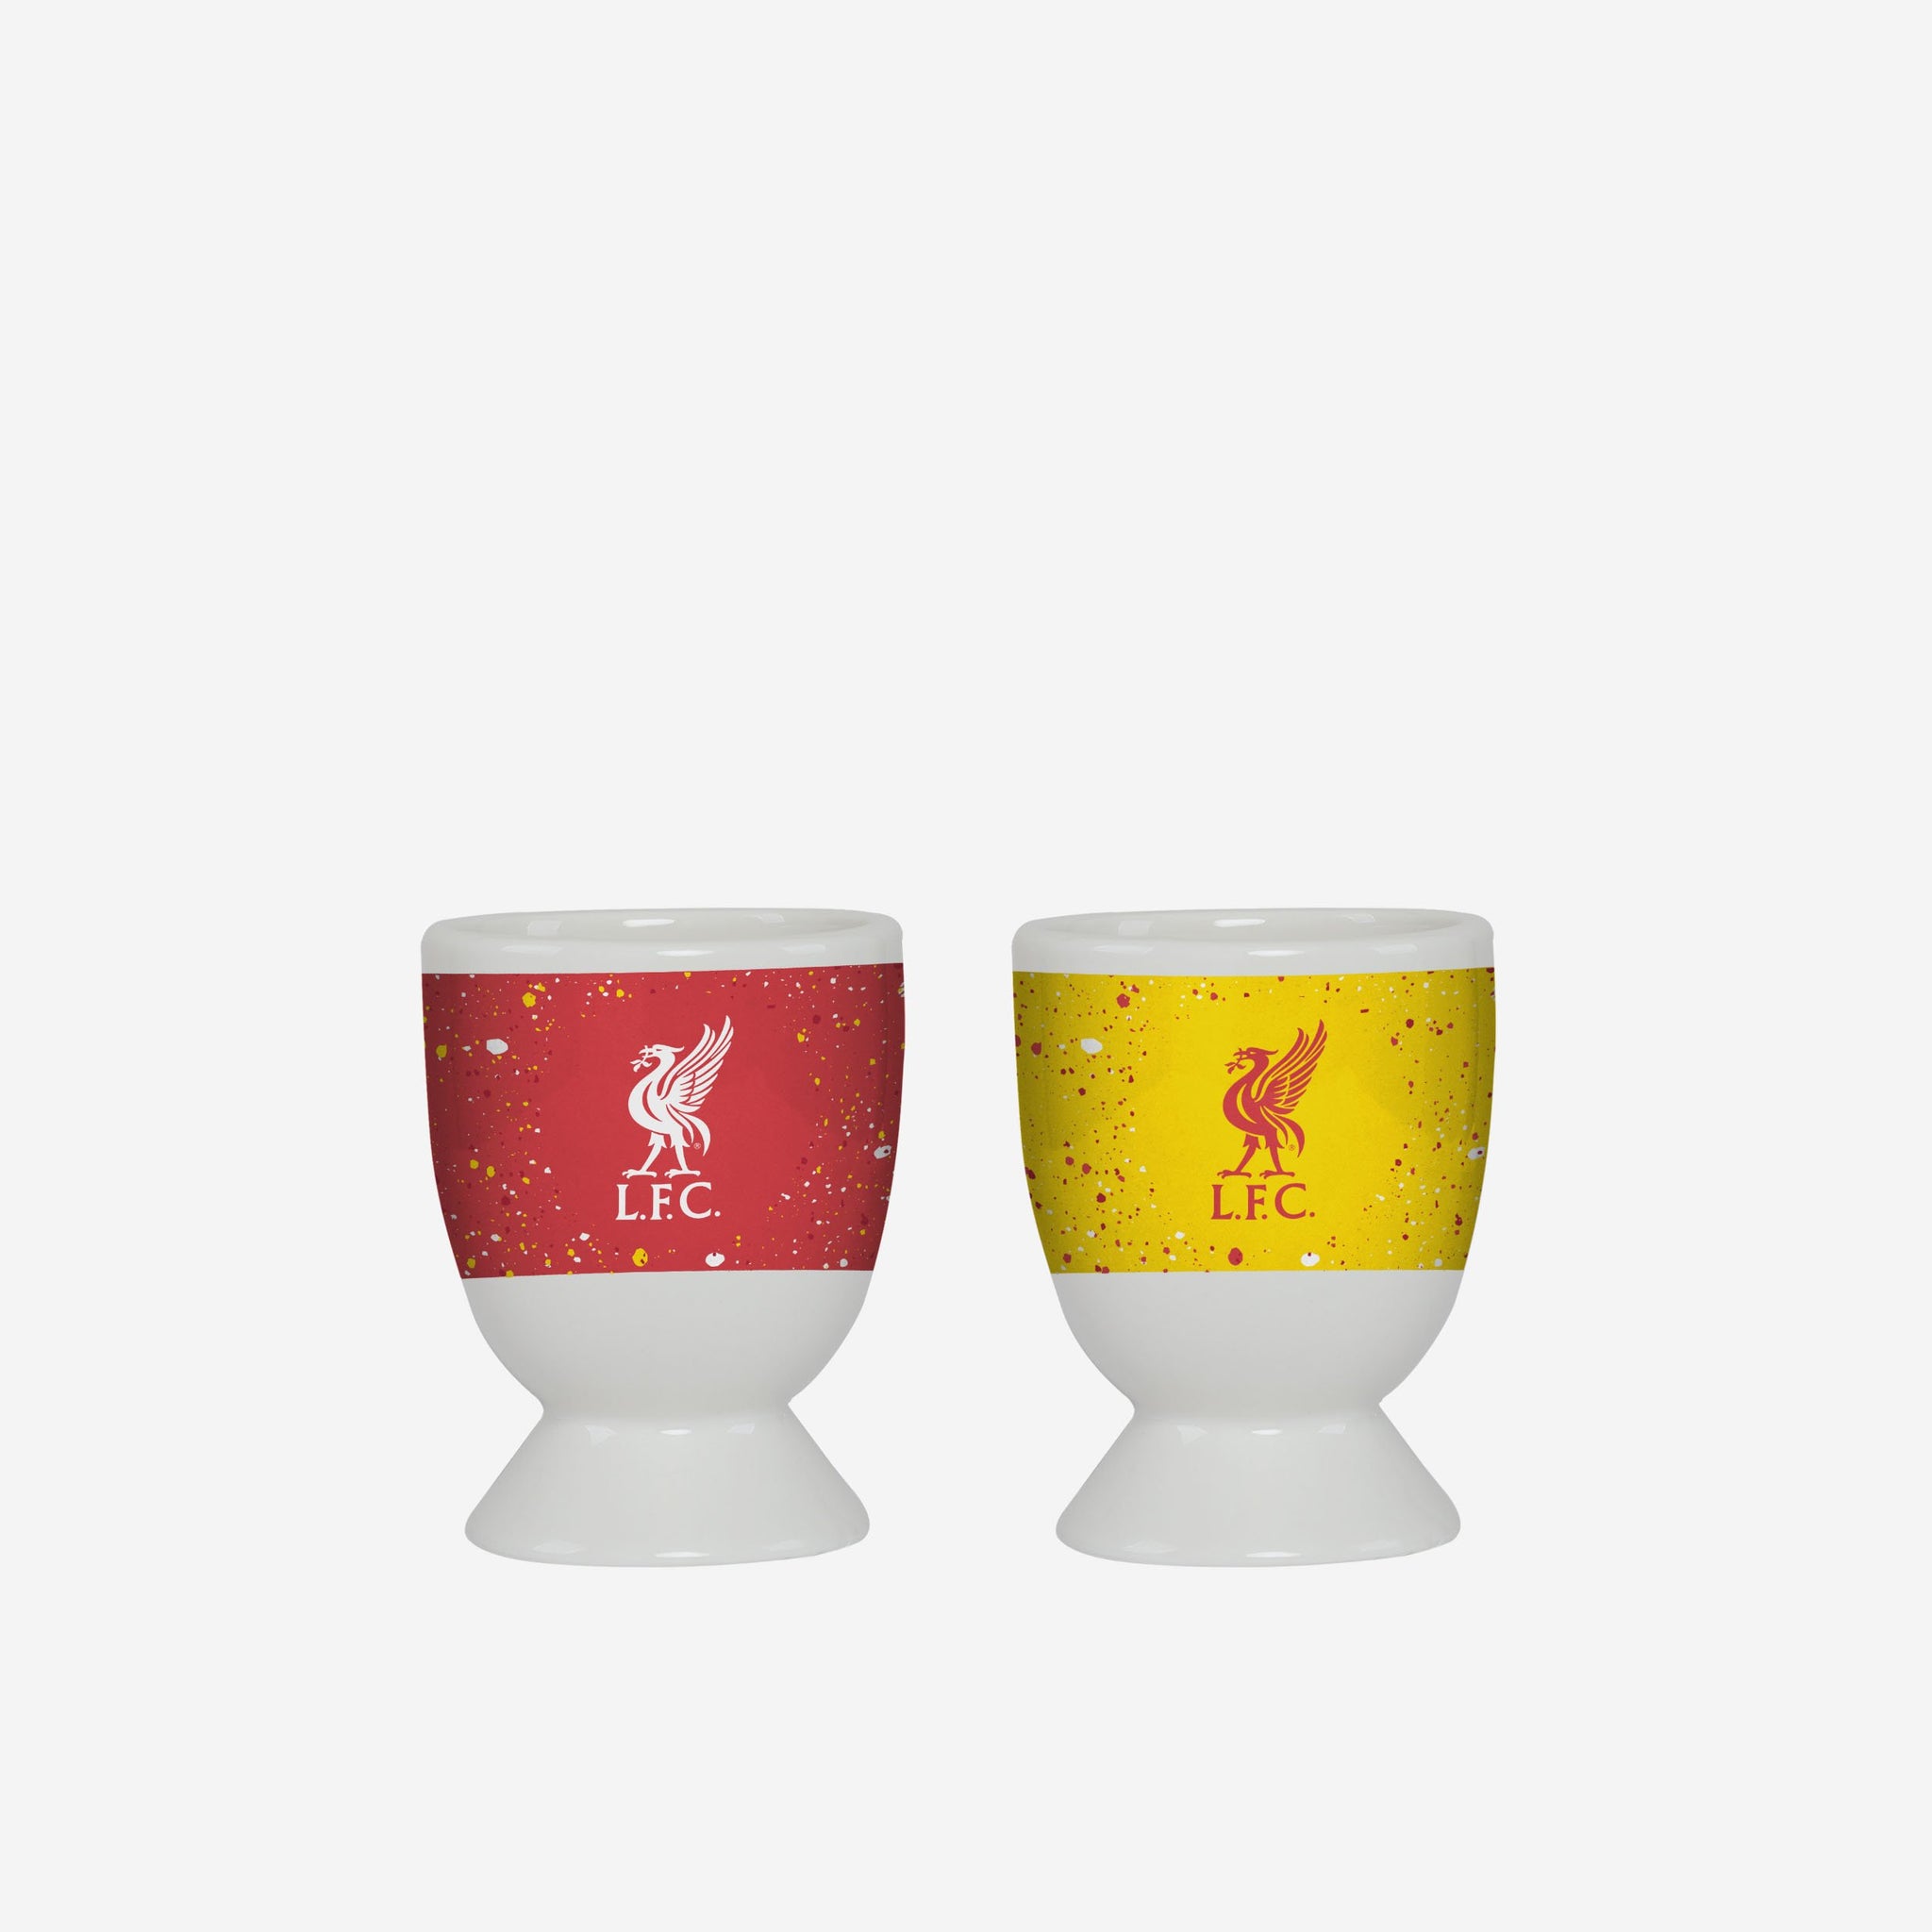 Home - Tableware - Egg Cups